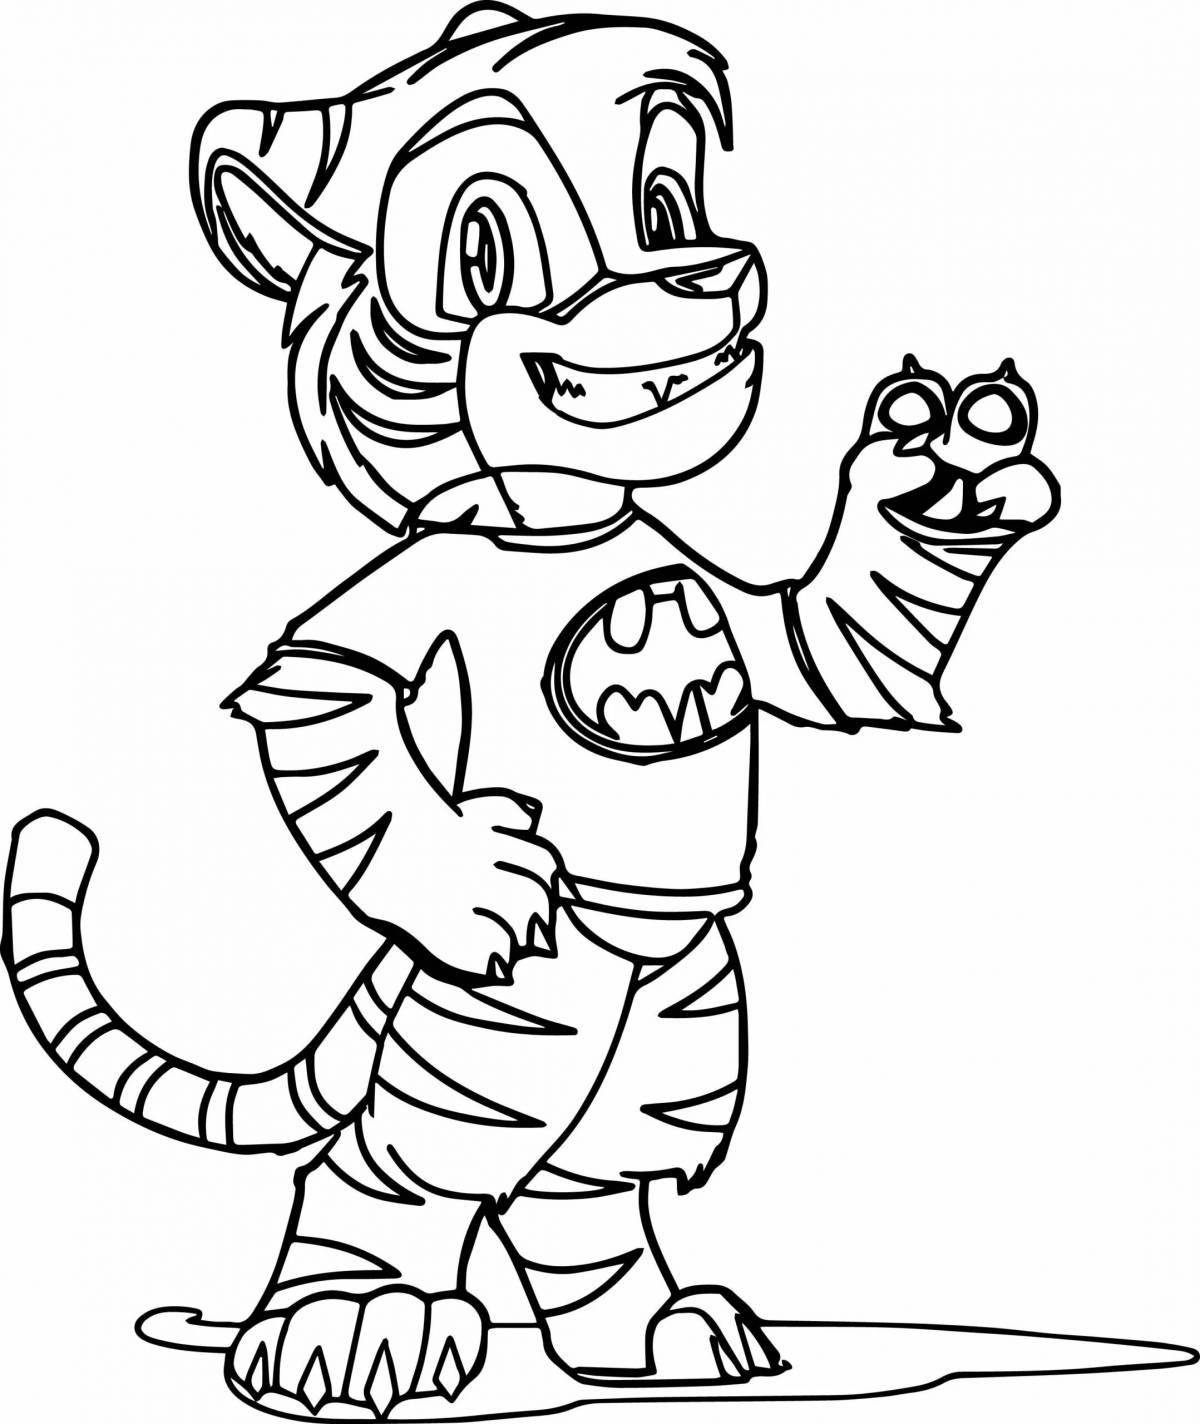 Cute tiger and leo coloring pages for kids